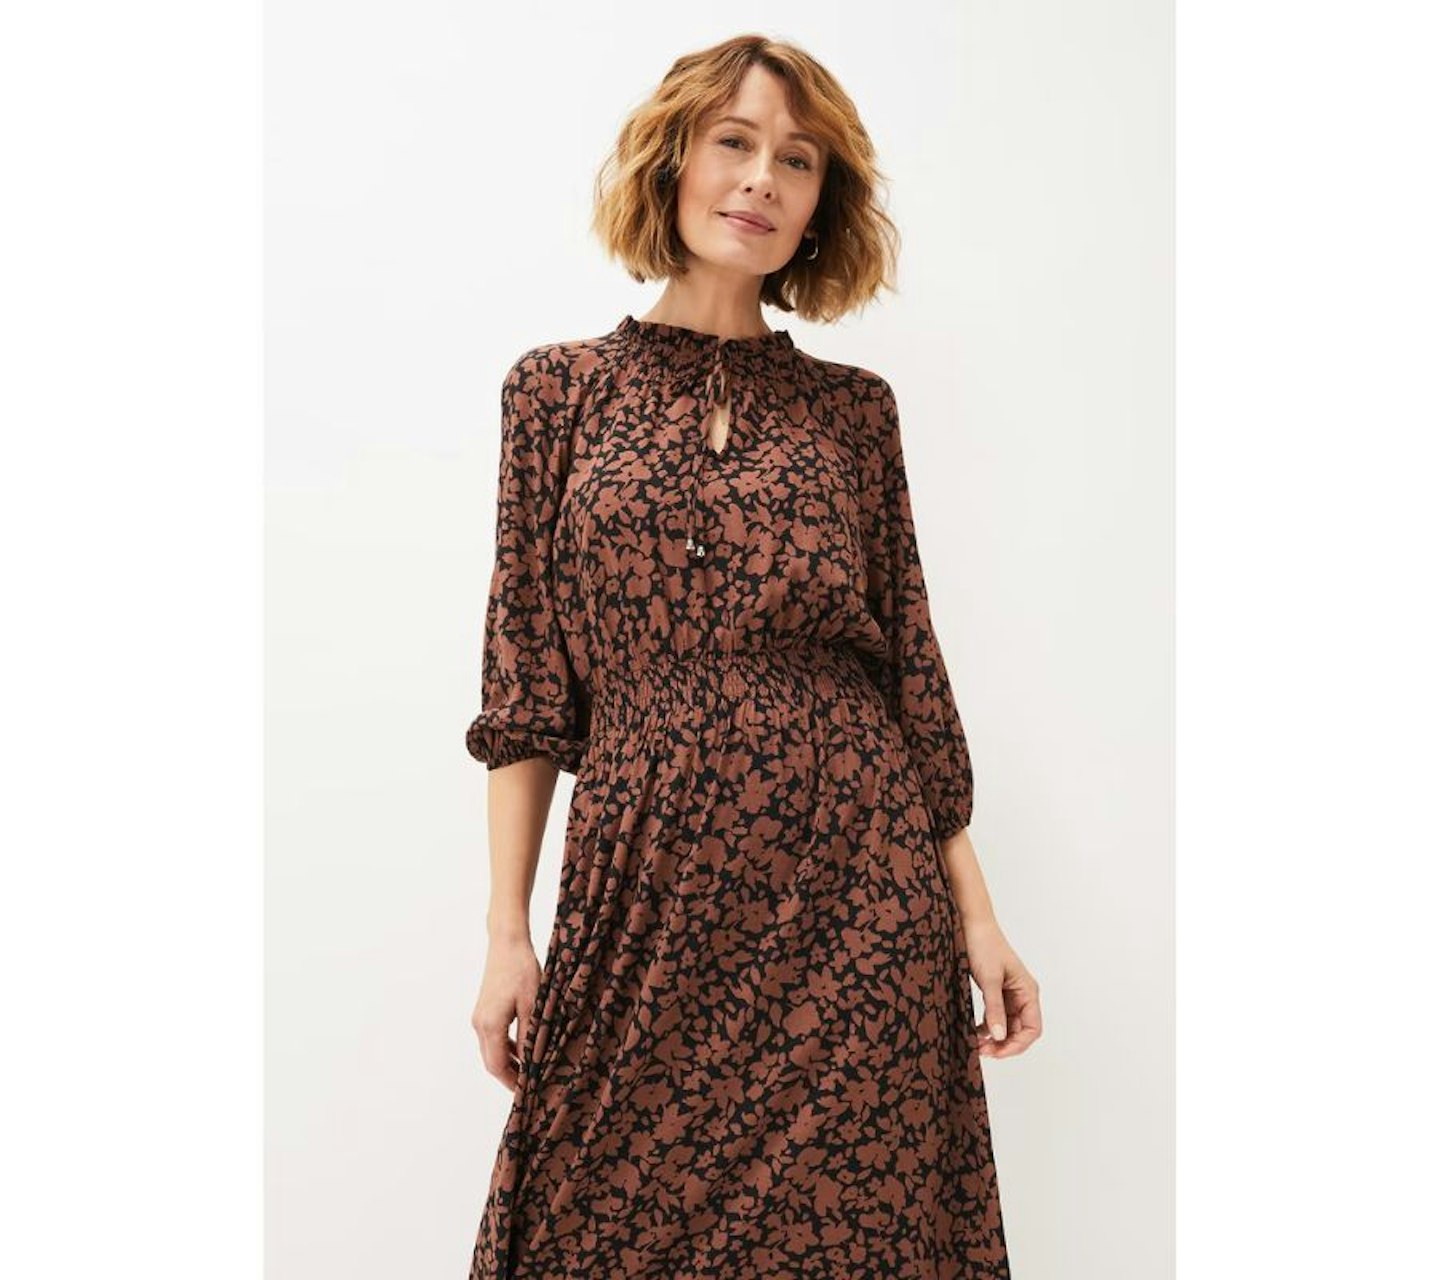 Phase Eight - ladies' dresses for over 50s